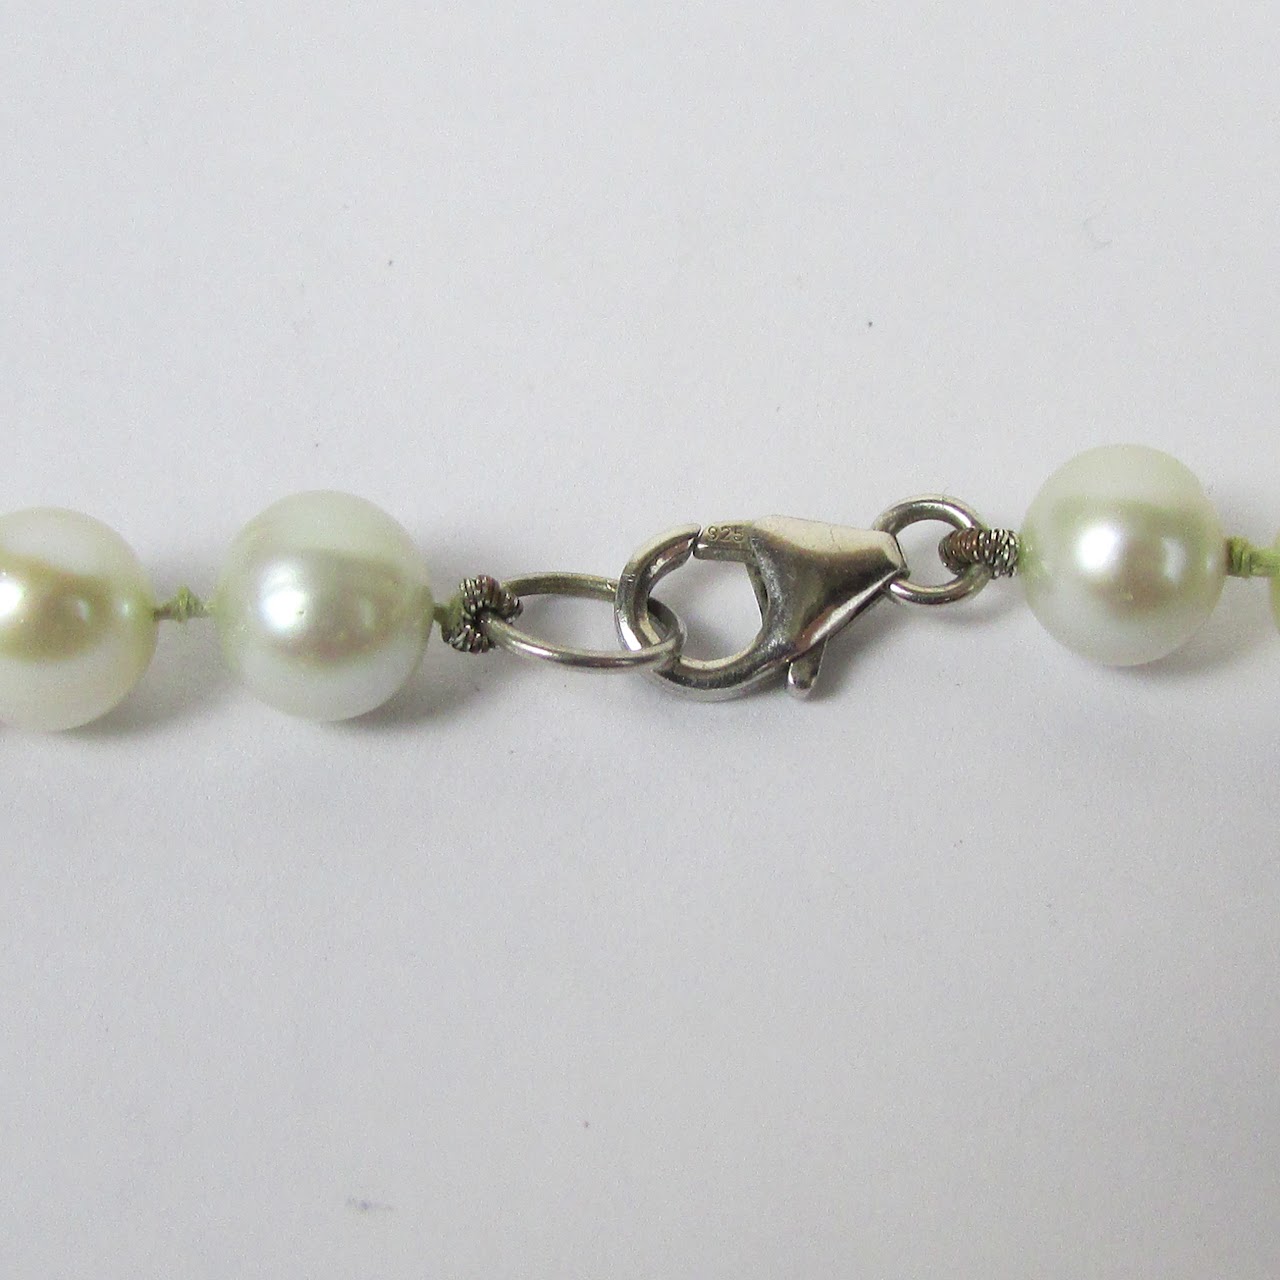 Pearl & Sterling Silver Strand